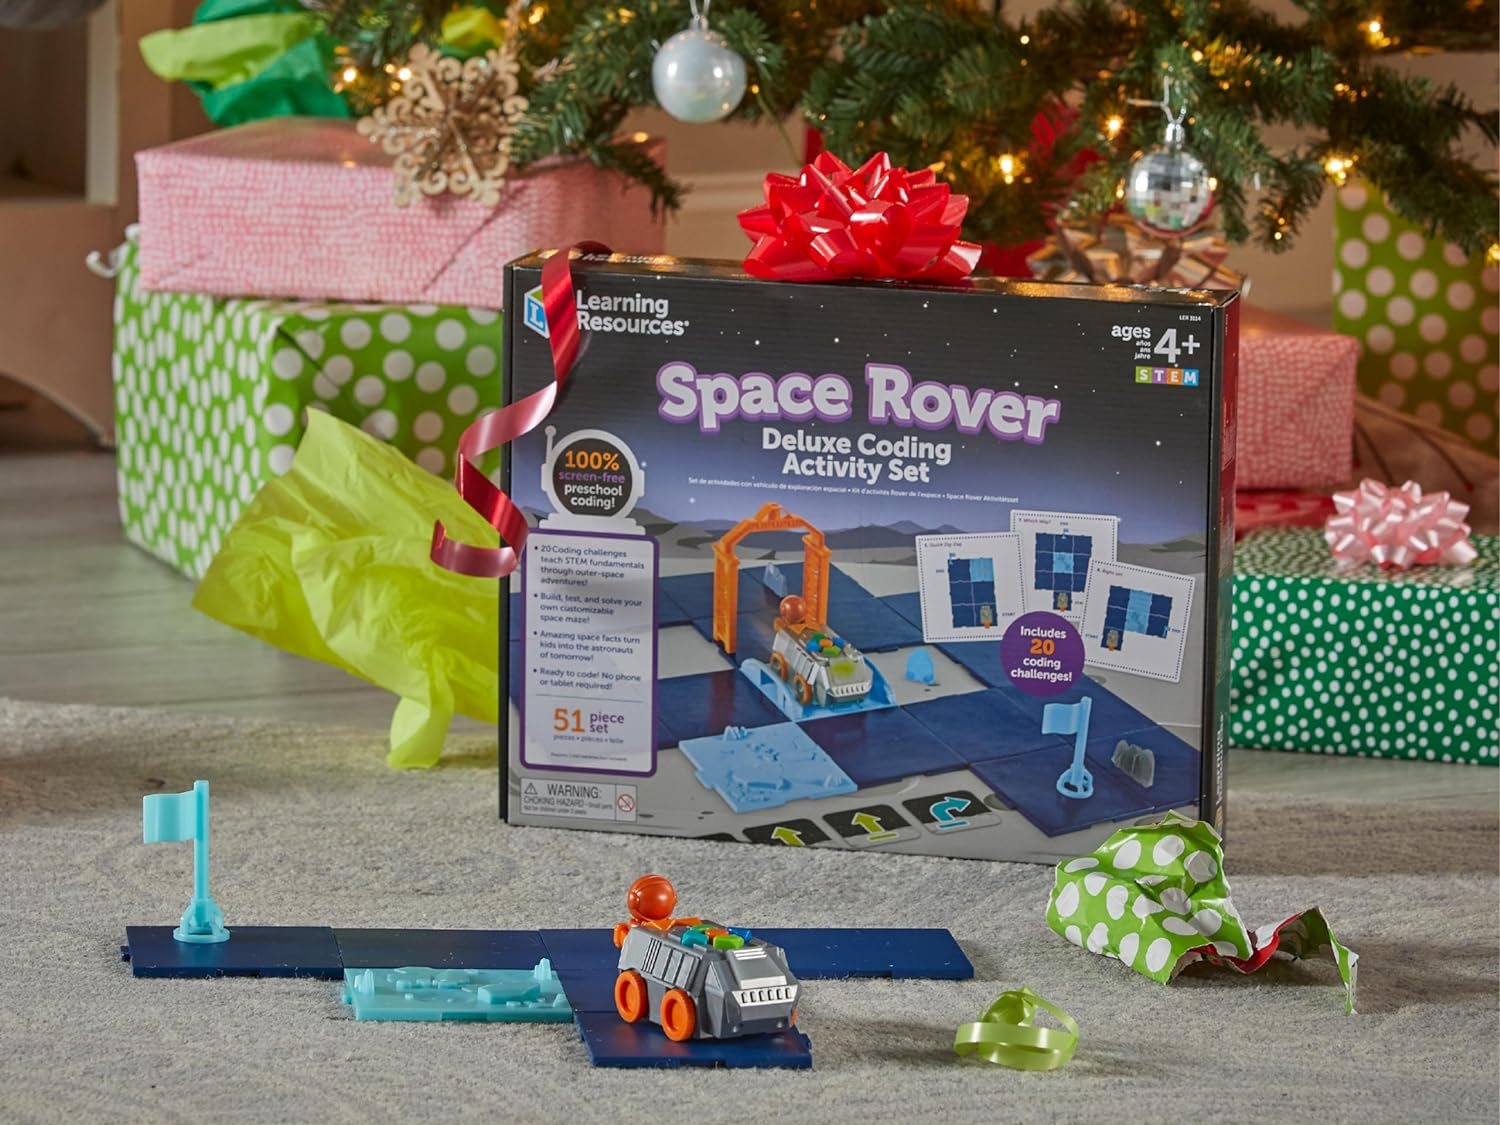 Gear Diary’s 2023 Holiday Toy Gift Guide: So Many Playful Delights for Everyone!